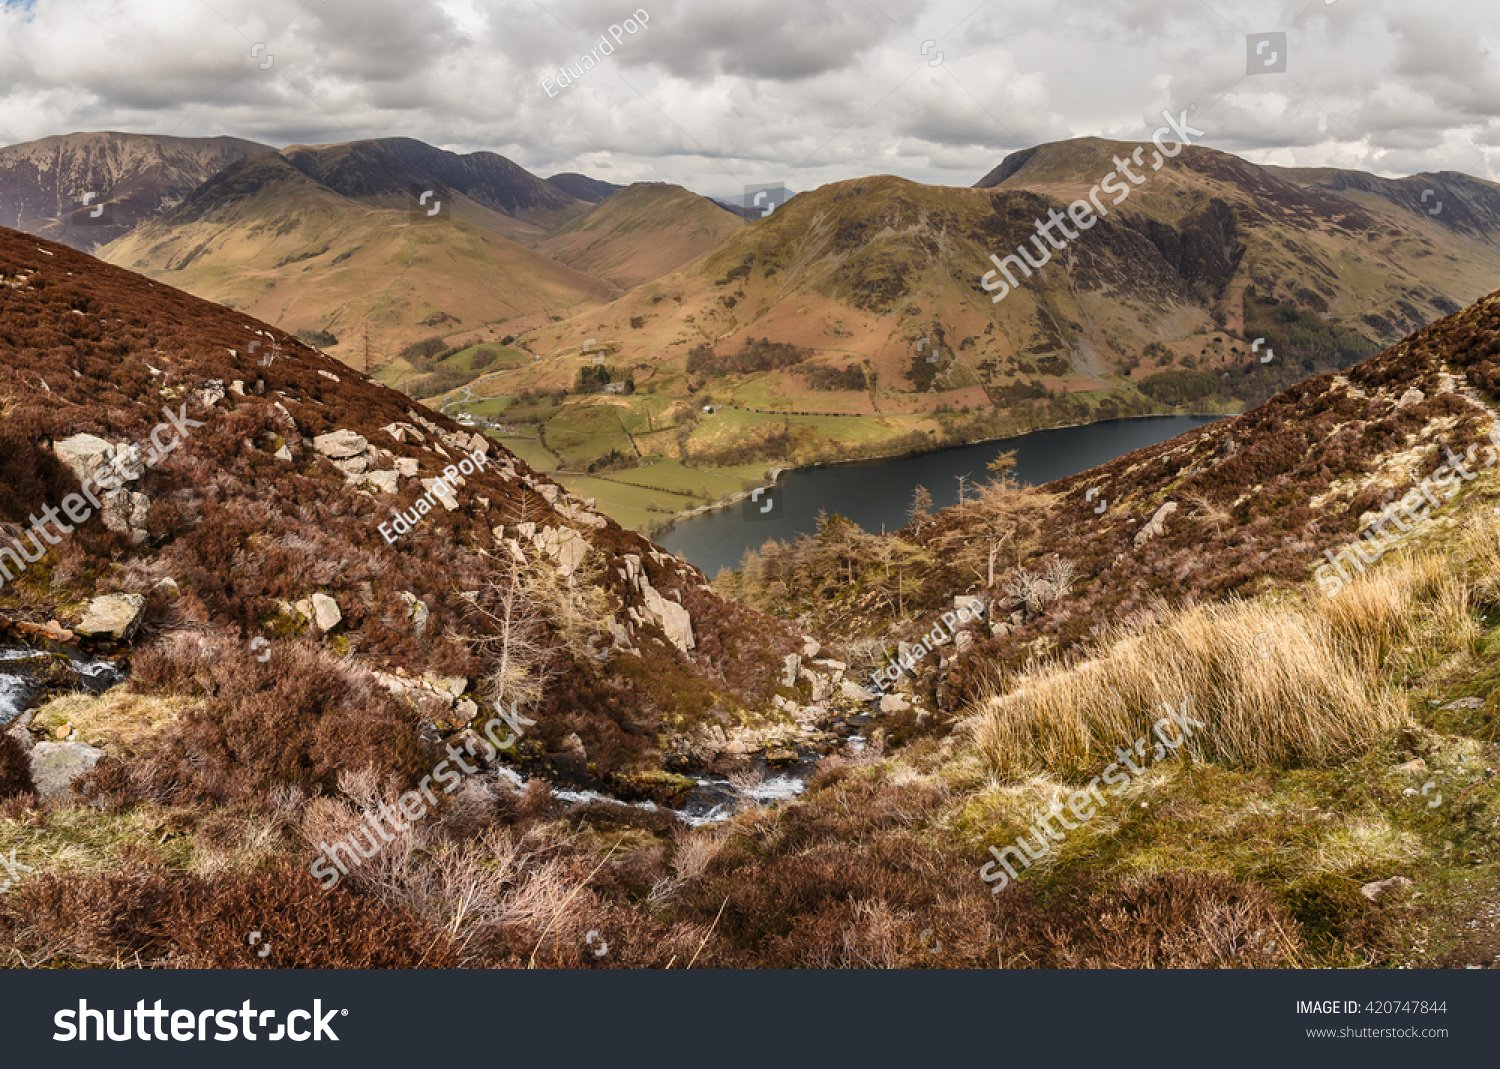 Buttermere, Lake District, as seen from the climb to High Stile. A small stream runs from the tarn to a waterfall #420747844